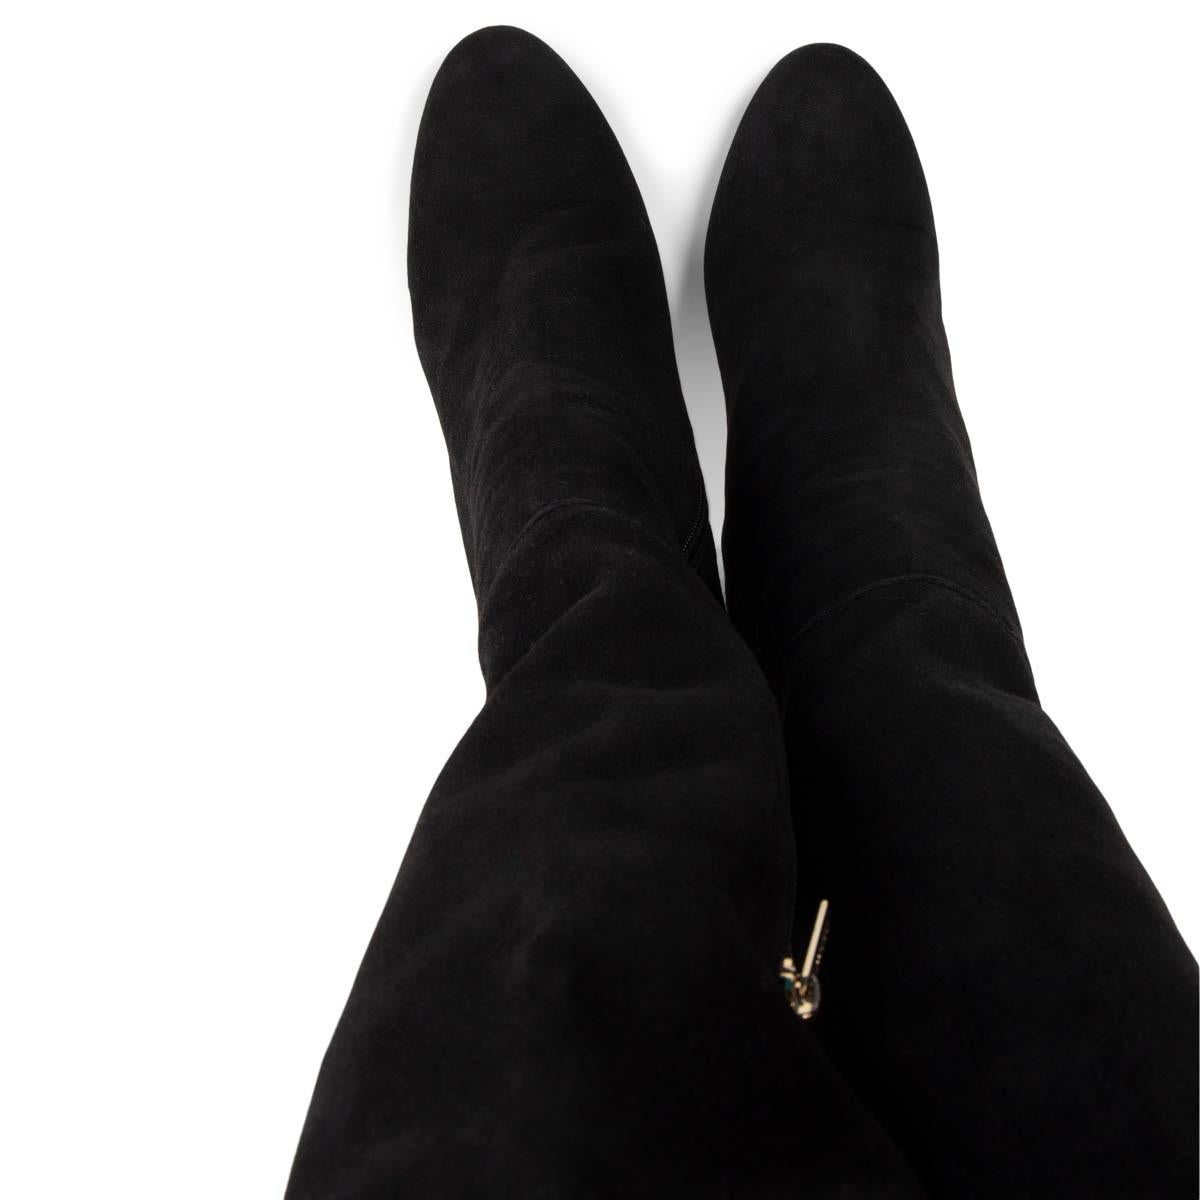 Black JIMMY CHOO black suede TONI Over the Knee Boots Shoes 36